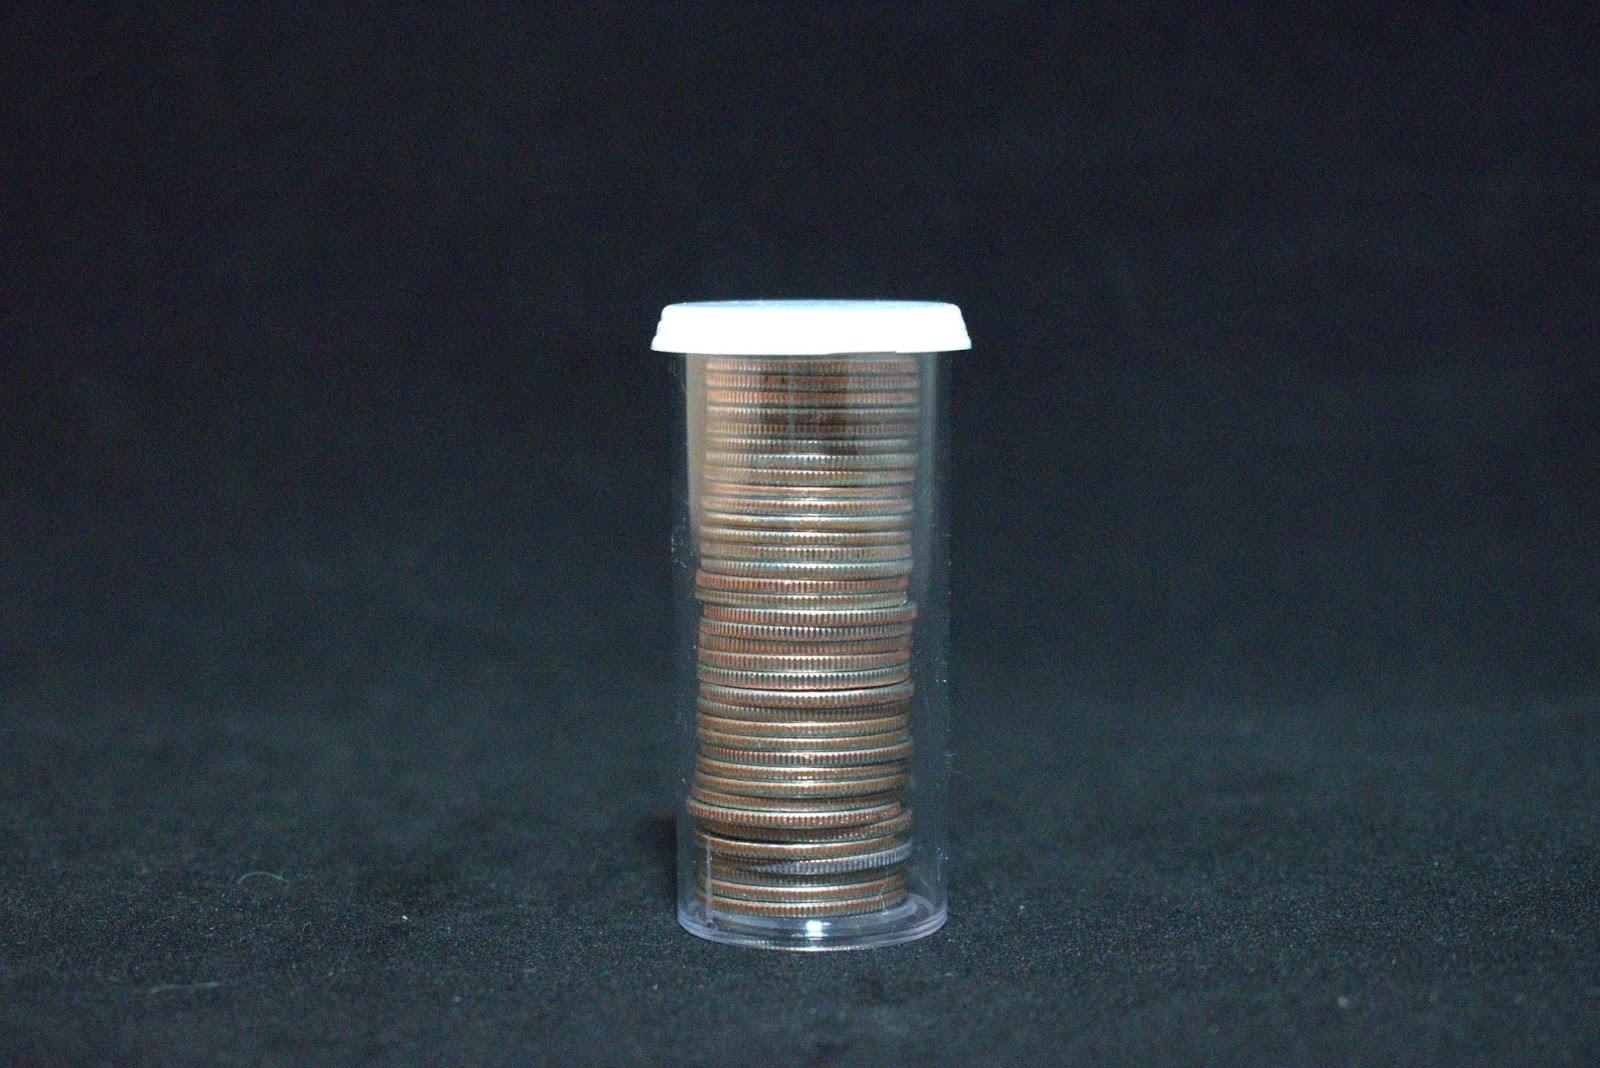 Stack of Quarters in a 9 Dram Vial